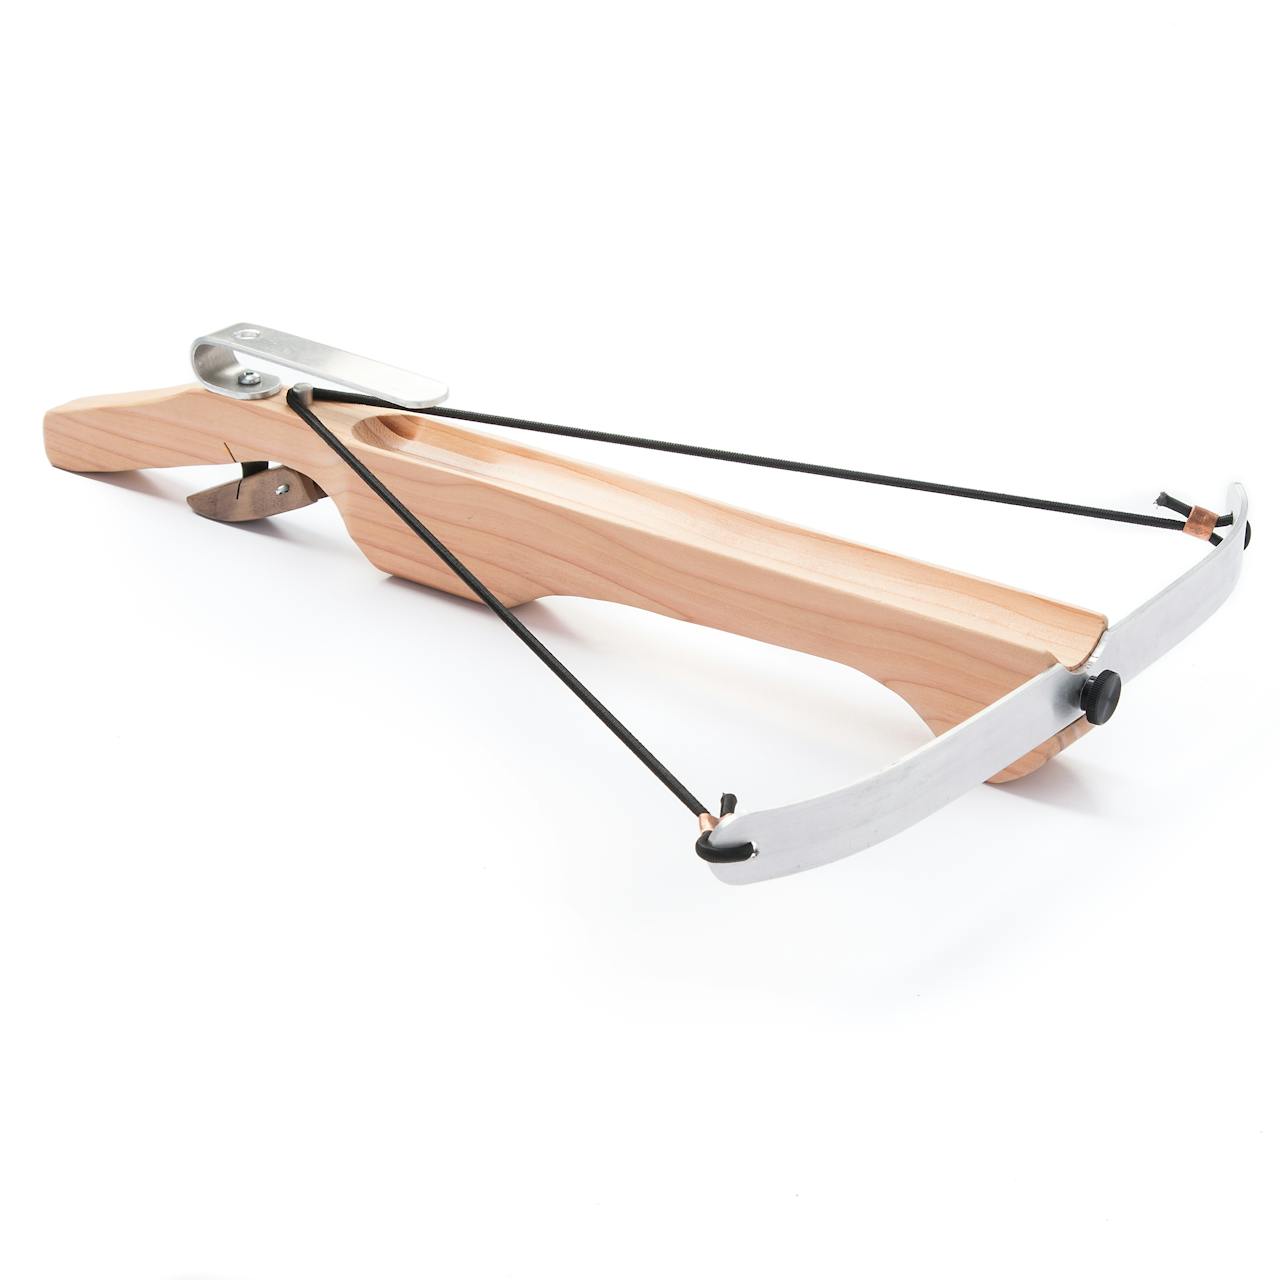 MMX Vancouver Marshmallow Crossbow